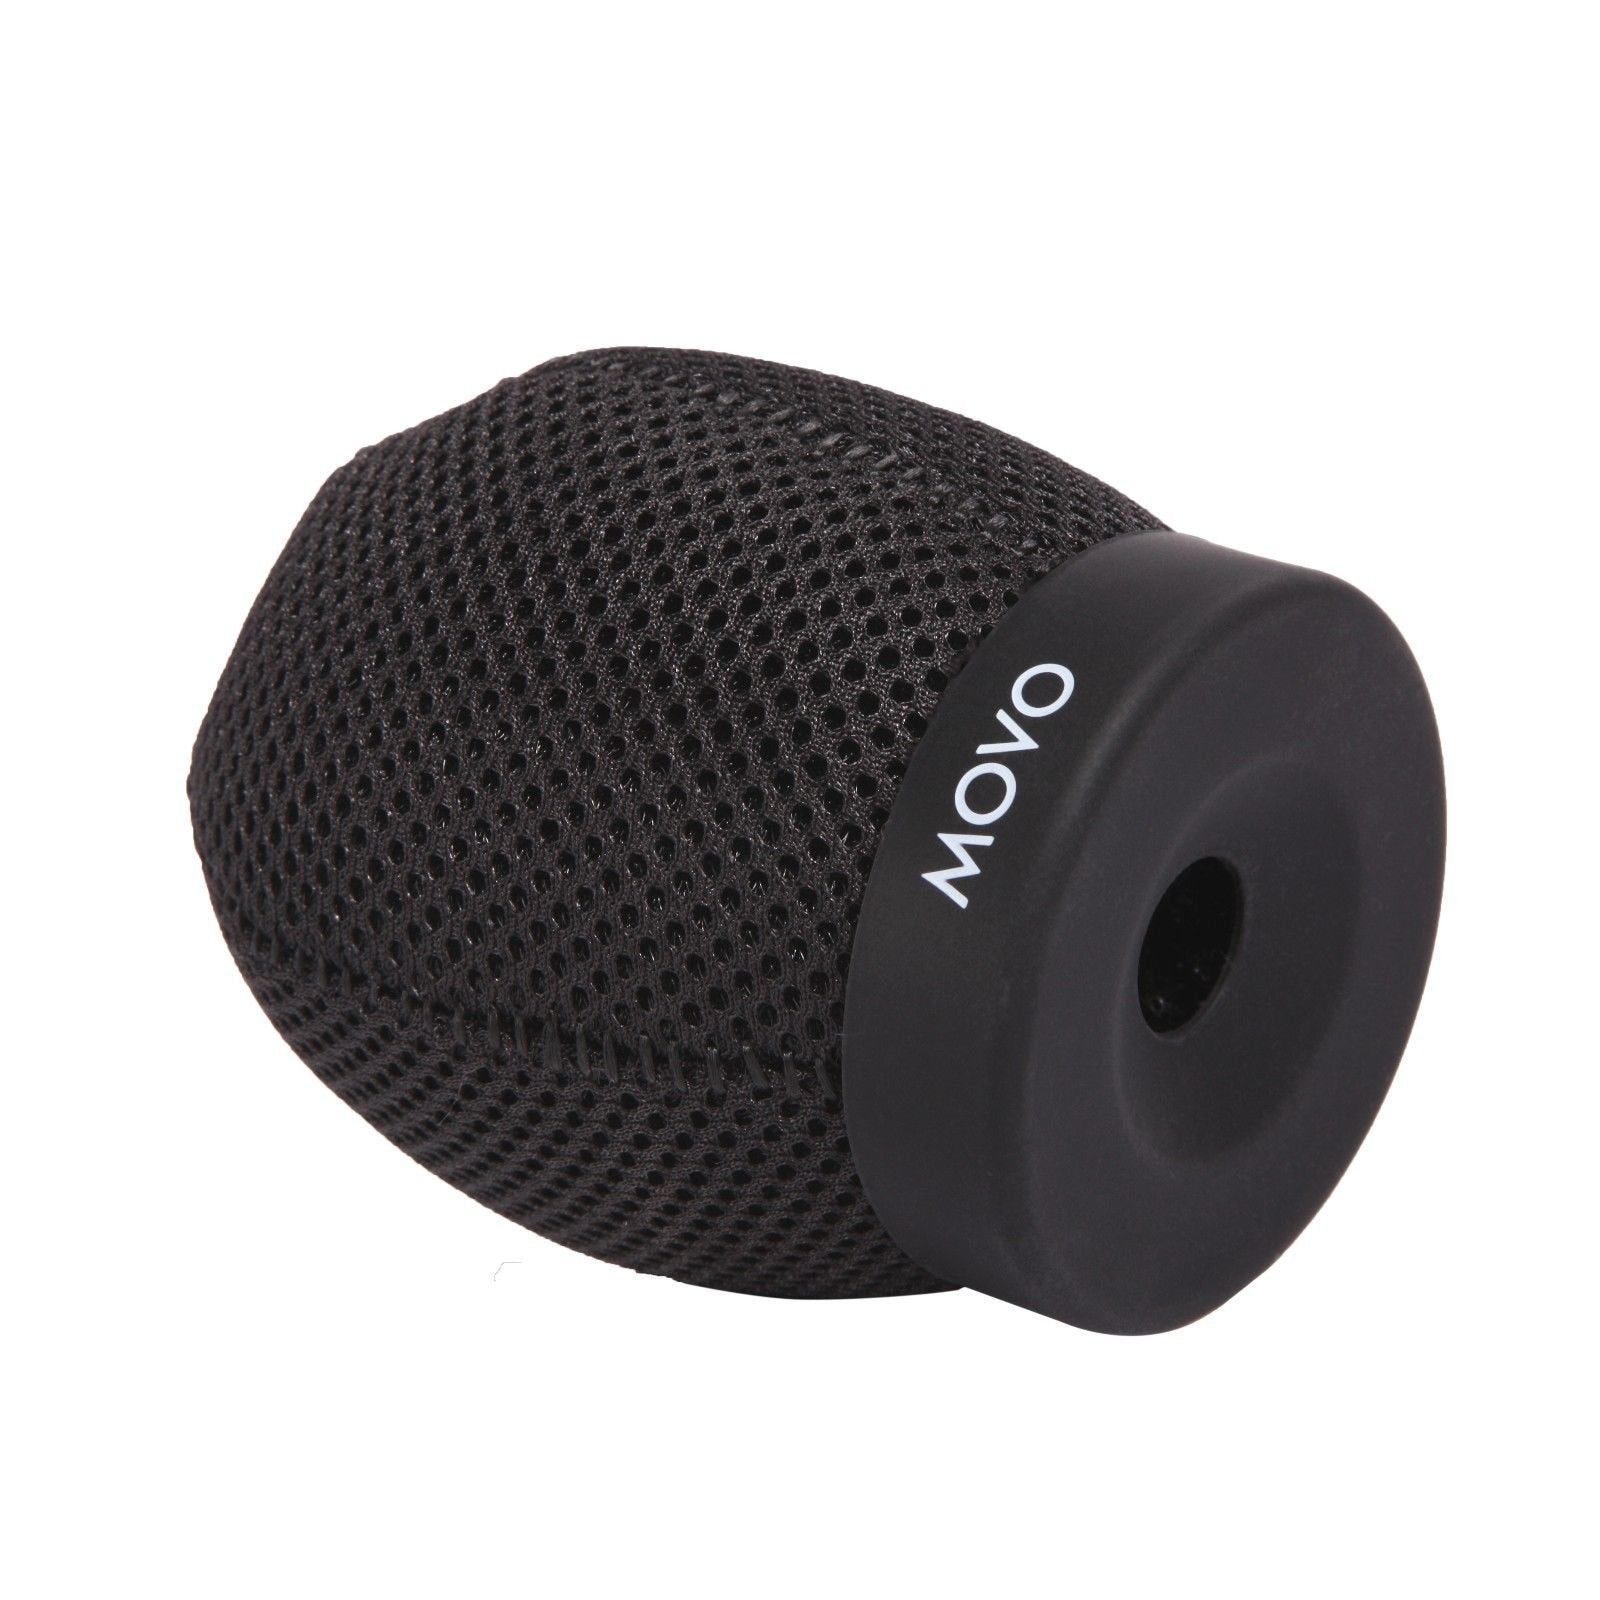 Movo WST50 Professional Premium Quality Ballistic Nylon Windscreen with Acoustic Foam Technology for Shotgun Microphones up to 3cm Long  - Like New